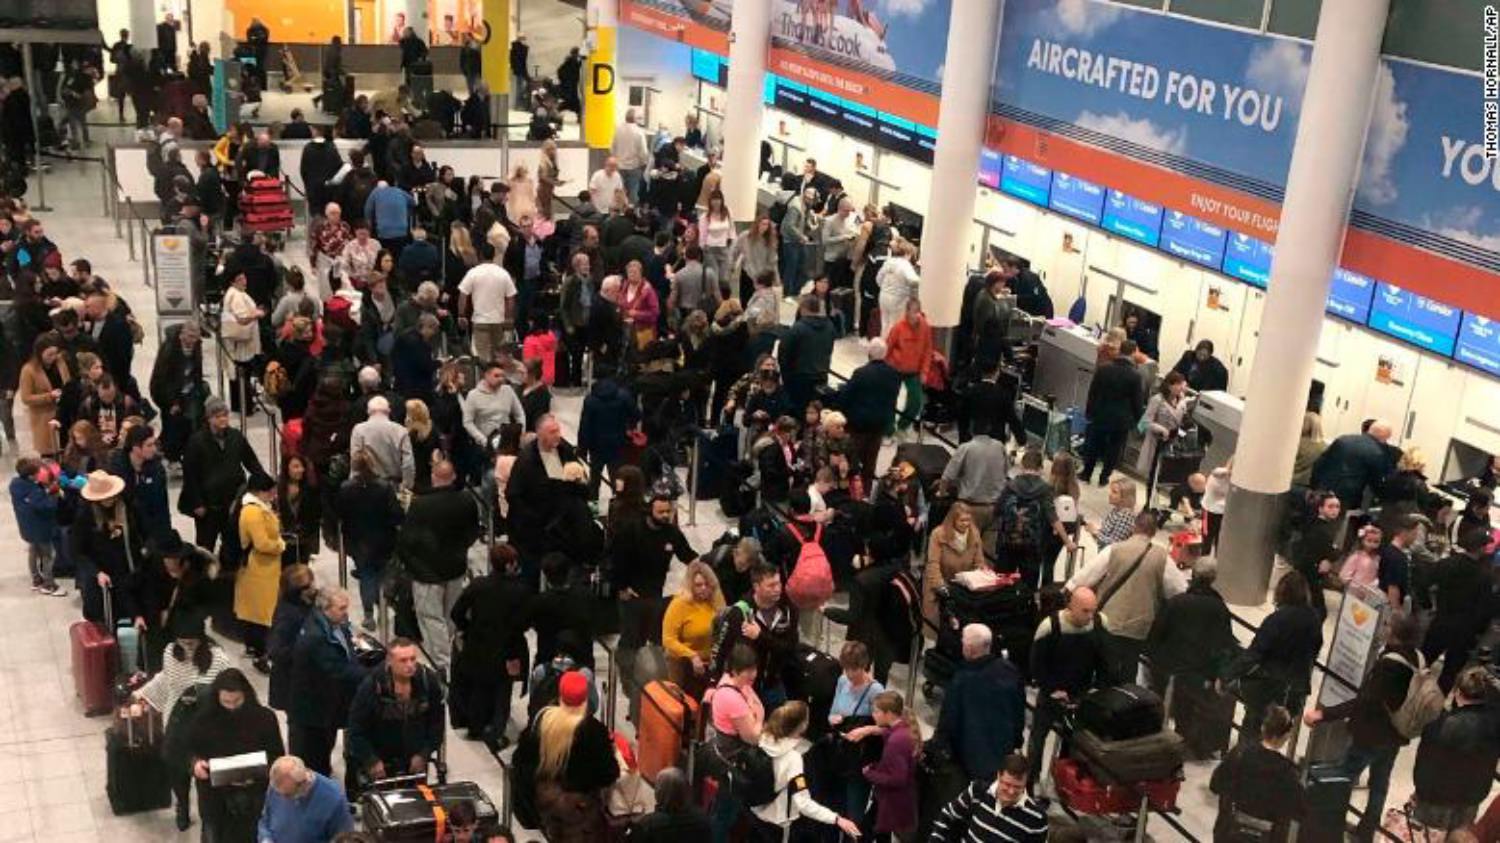 Drones shut down London's Gatwick Airport during busy holiday travel season